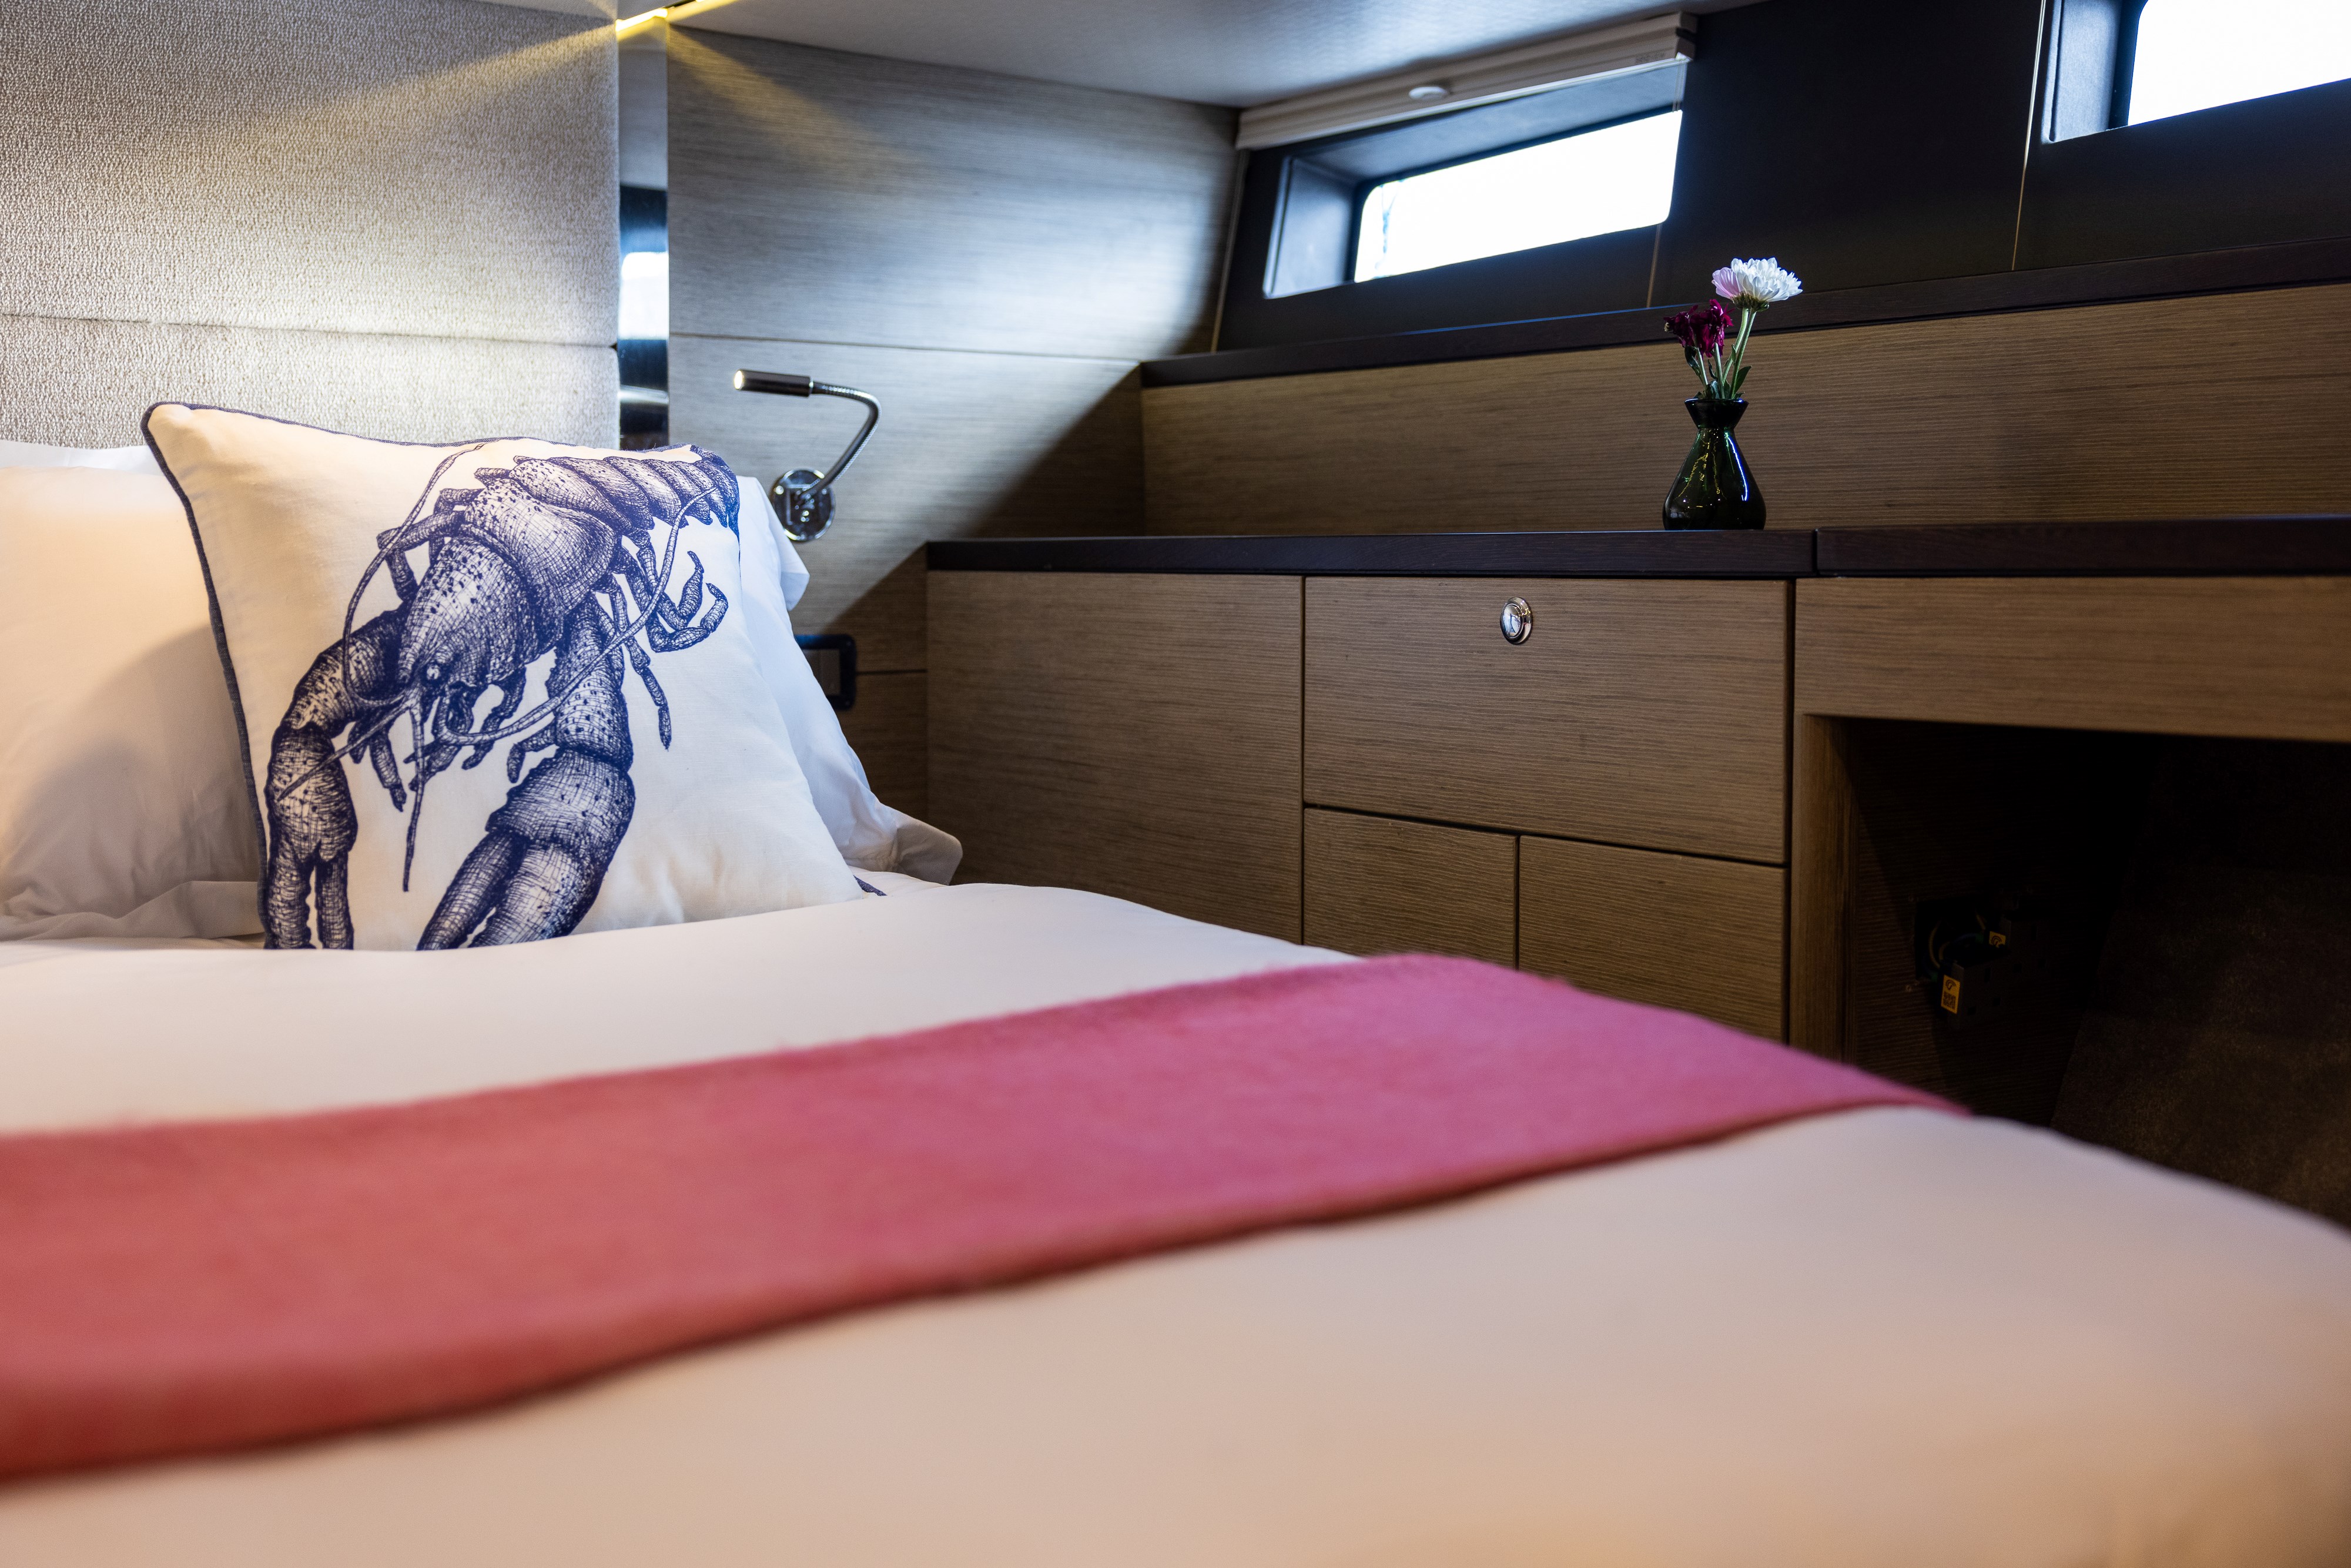 One of the three luxurious cabins on the Hardy 50DS